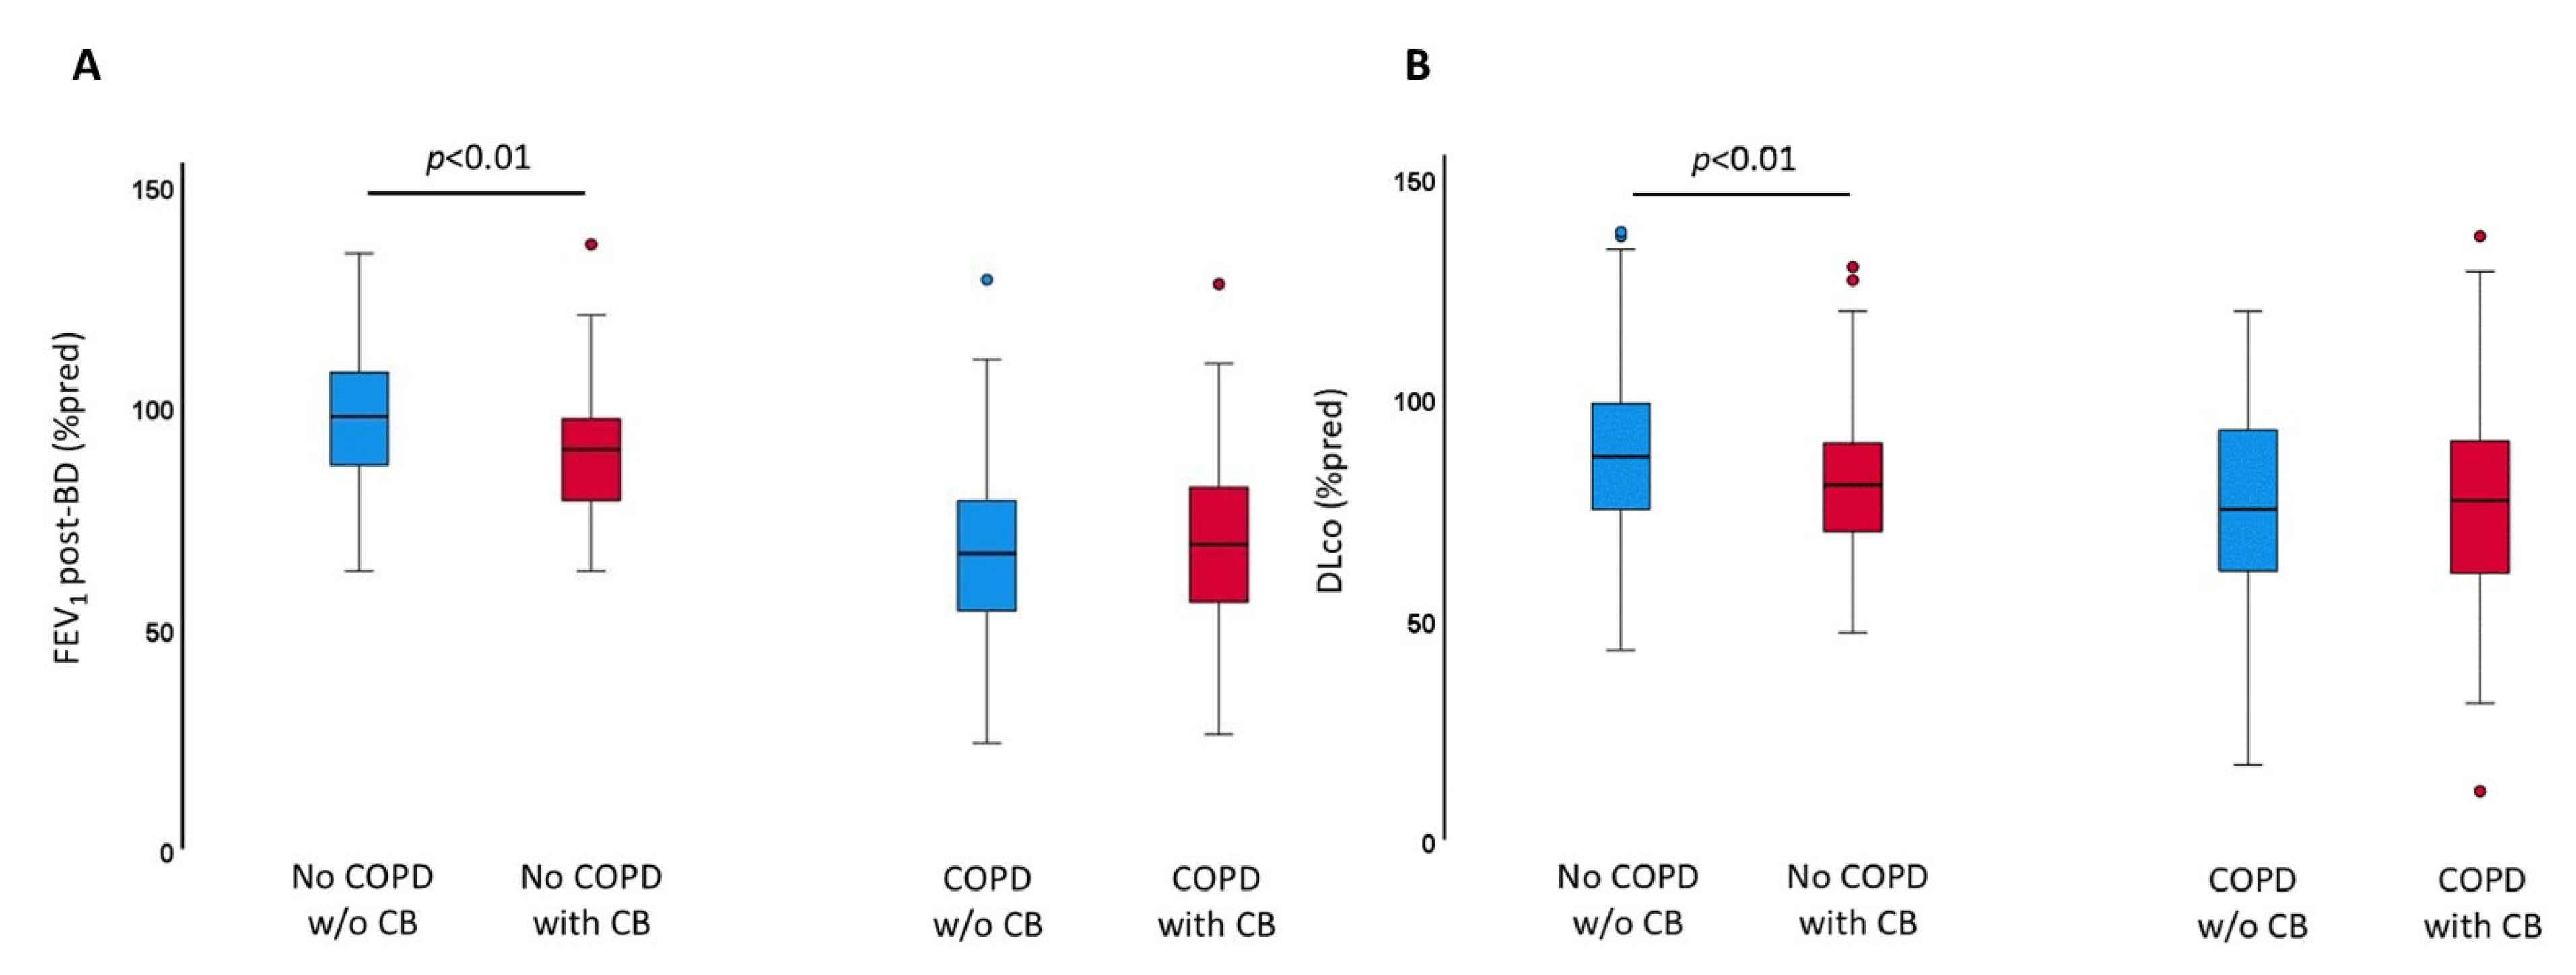 JCM | Free Full-Text | Chronic Bronchitis Affects Outcomes in Smokers  without Chronic Obstructive Pulmonary Disease (COPD)